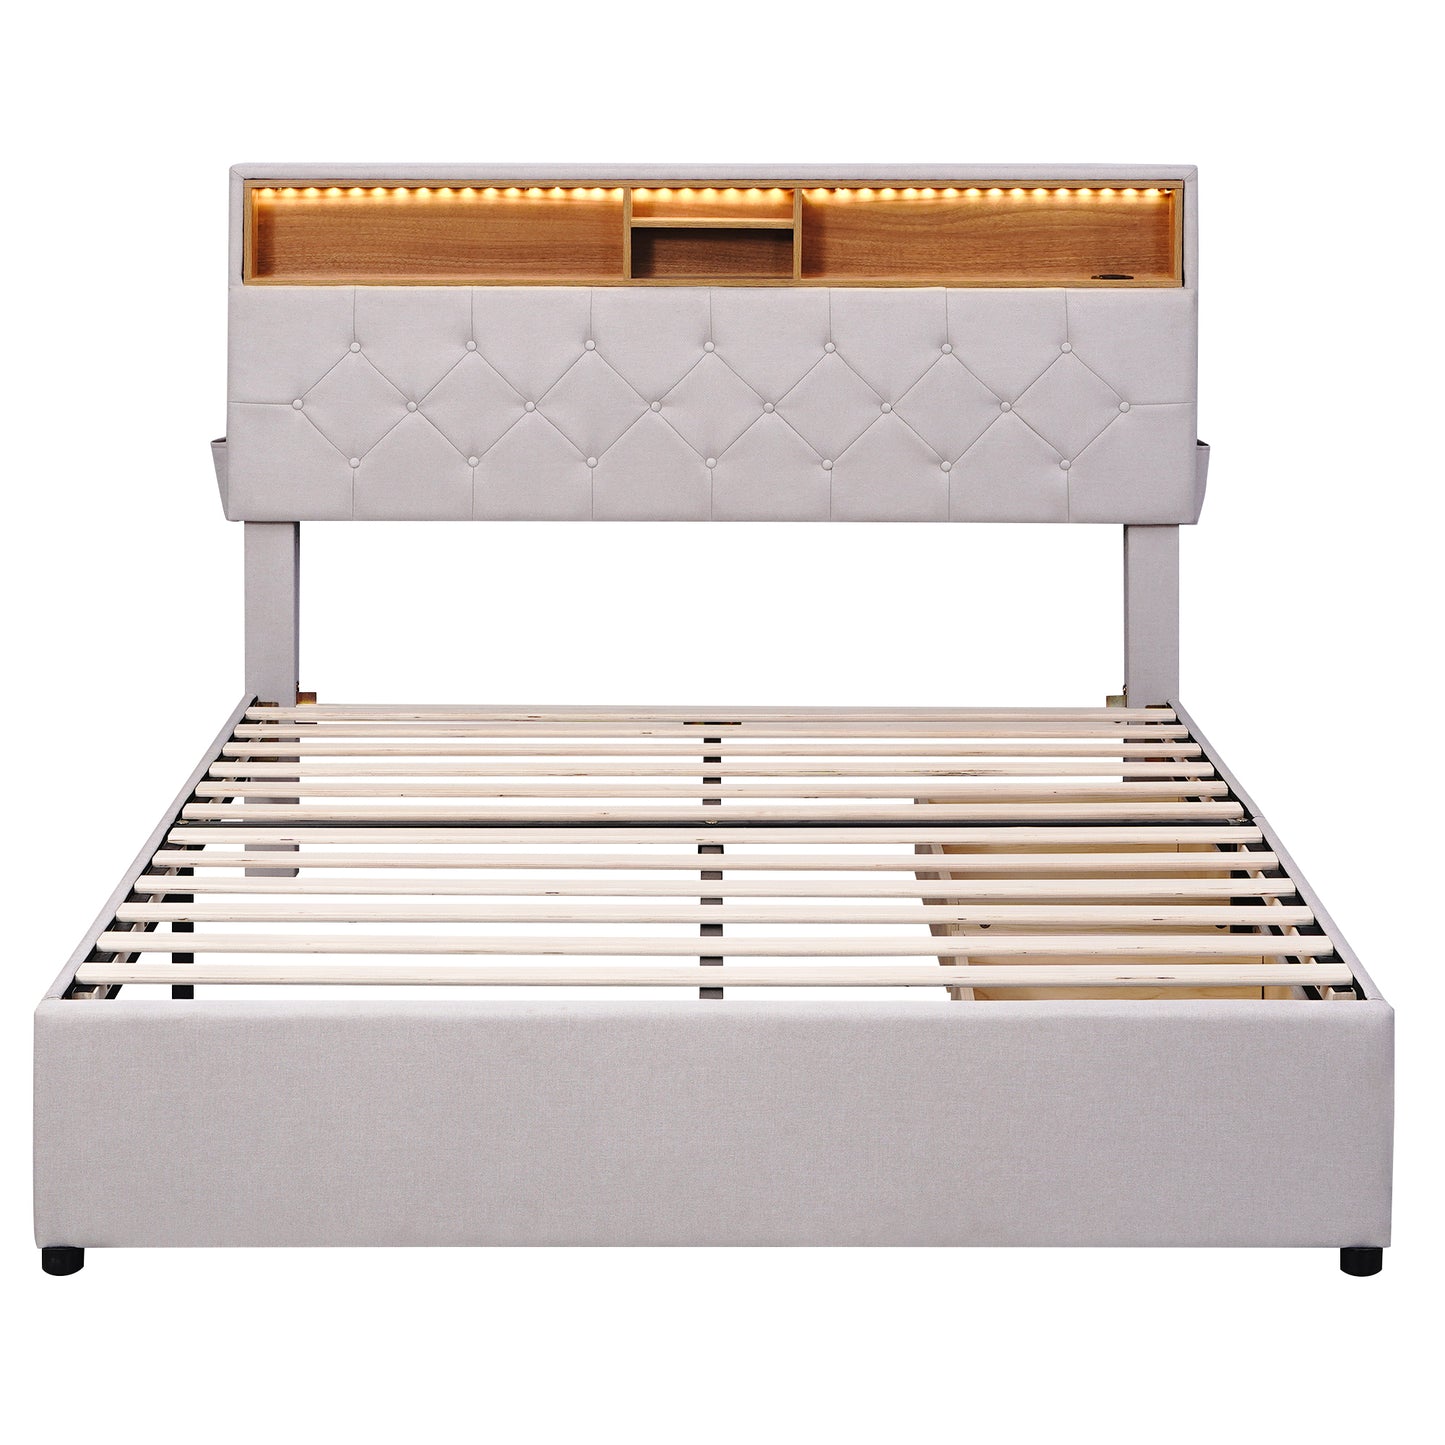 Full Size Upholstered Platform Bed with Storage Headboard, LED, USB Charging and 2 Drawers, Beige